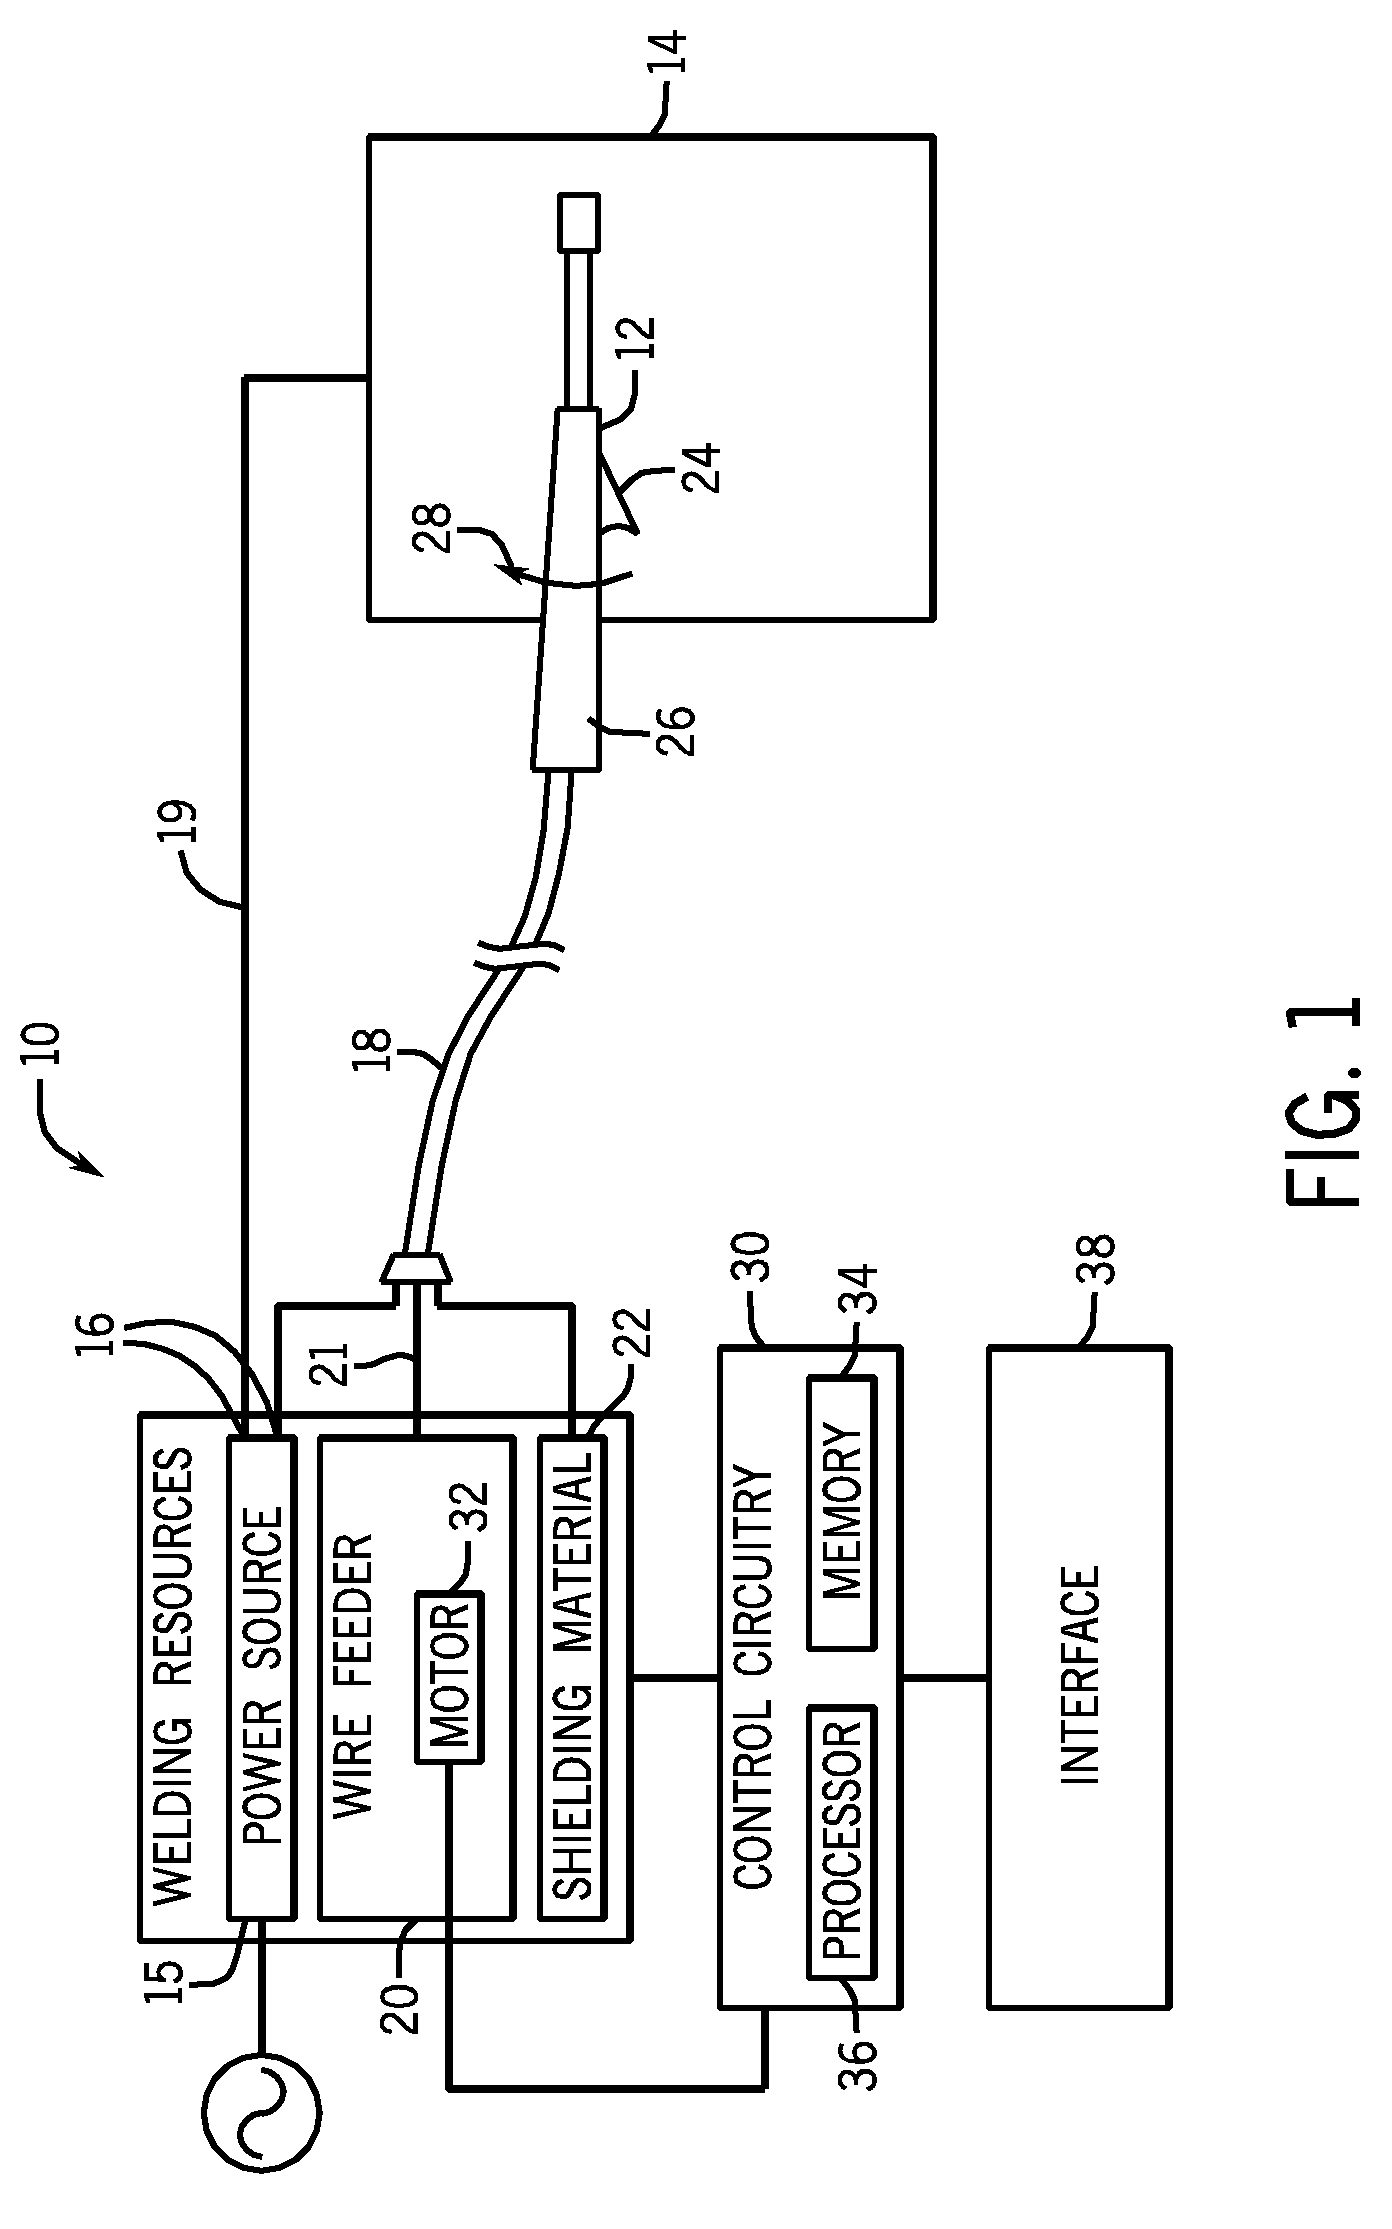 System and method for determining attachment and polarity of a welding electrode